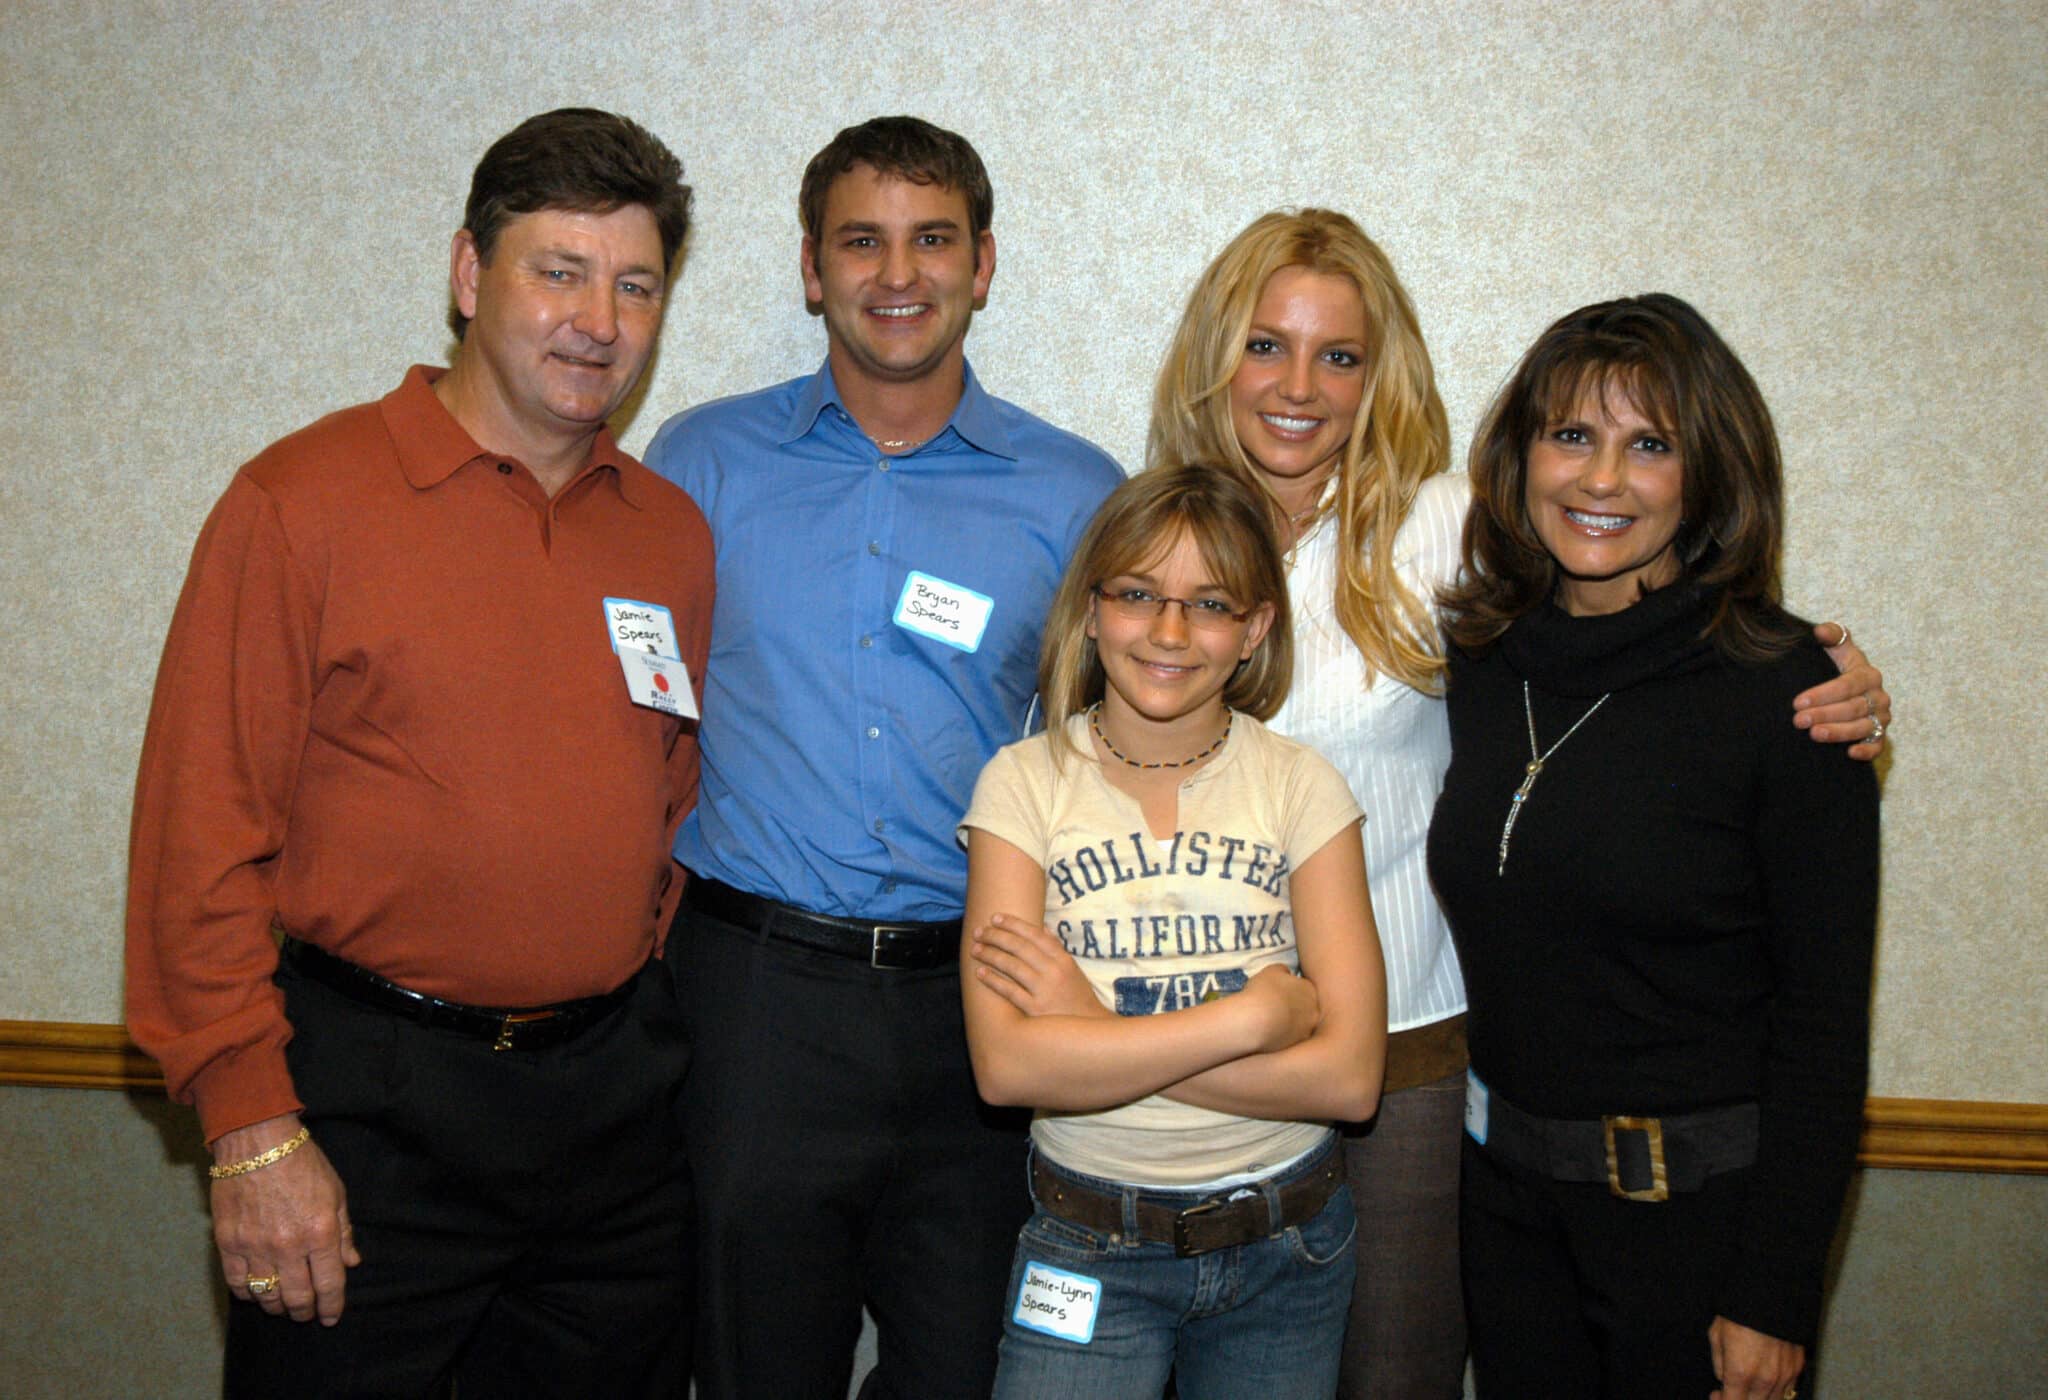 Jamie Spears, Bryan Spears, Jamie-Lynn Spears, Lynne Spears, and Britney Spears all post for a photo in 2003